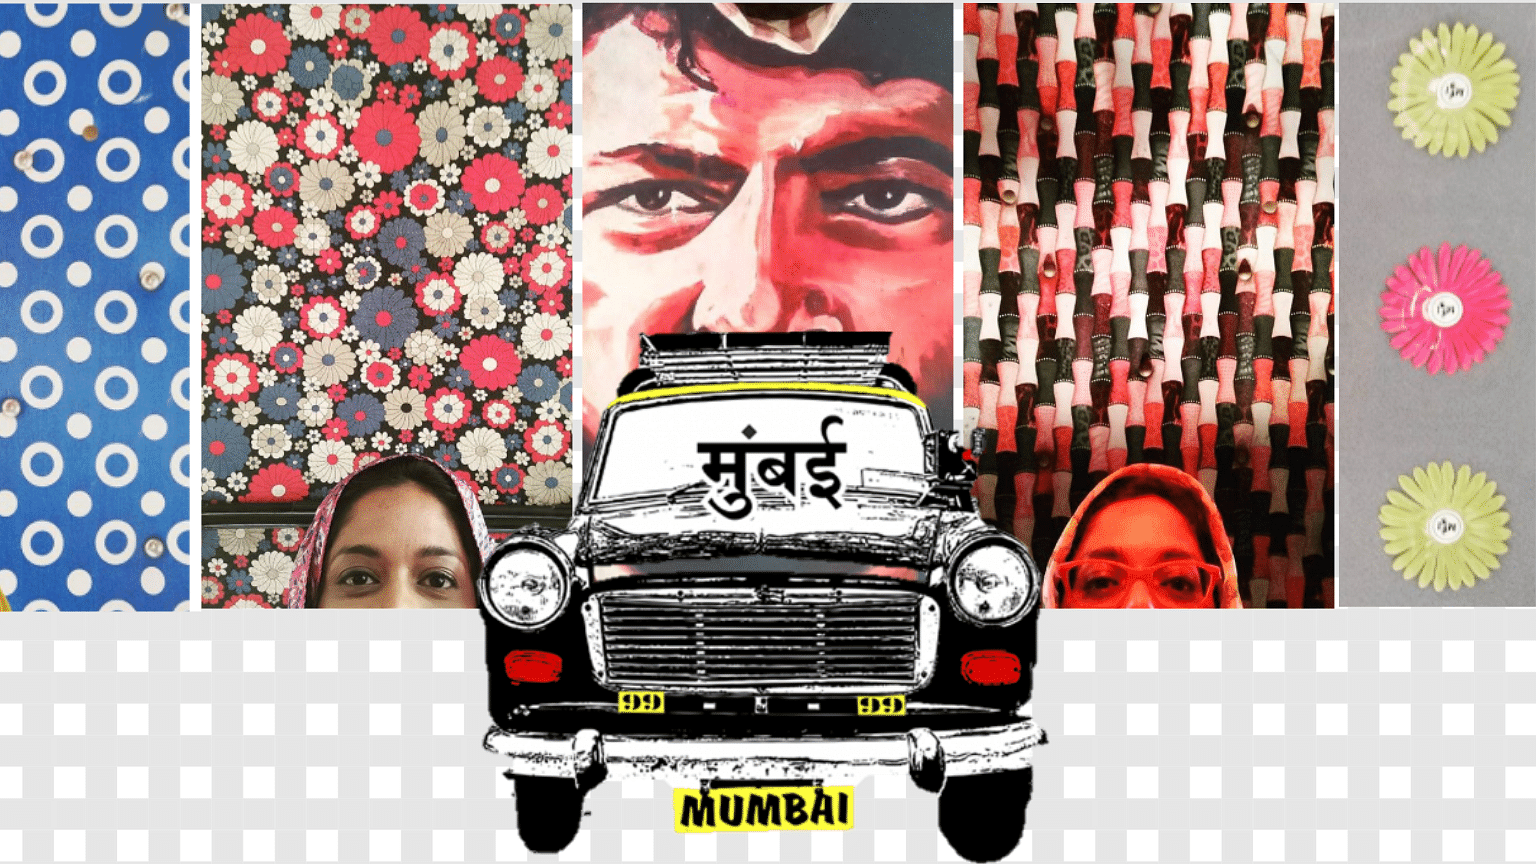 The next time you take a kaali-peeli taxi in Mumbai, remember – there’s an art gallery exhibit moving right with you.